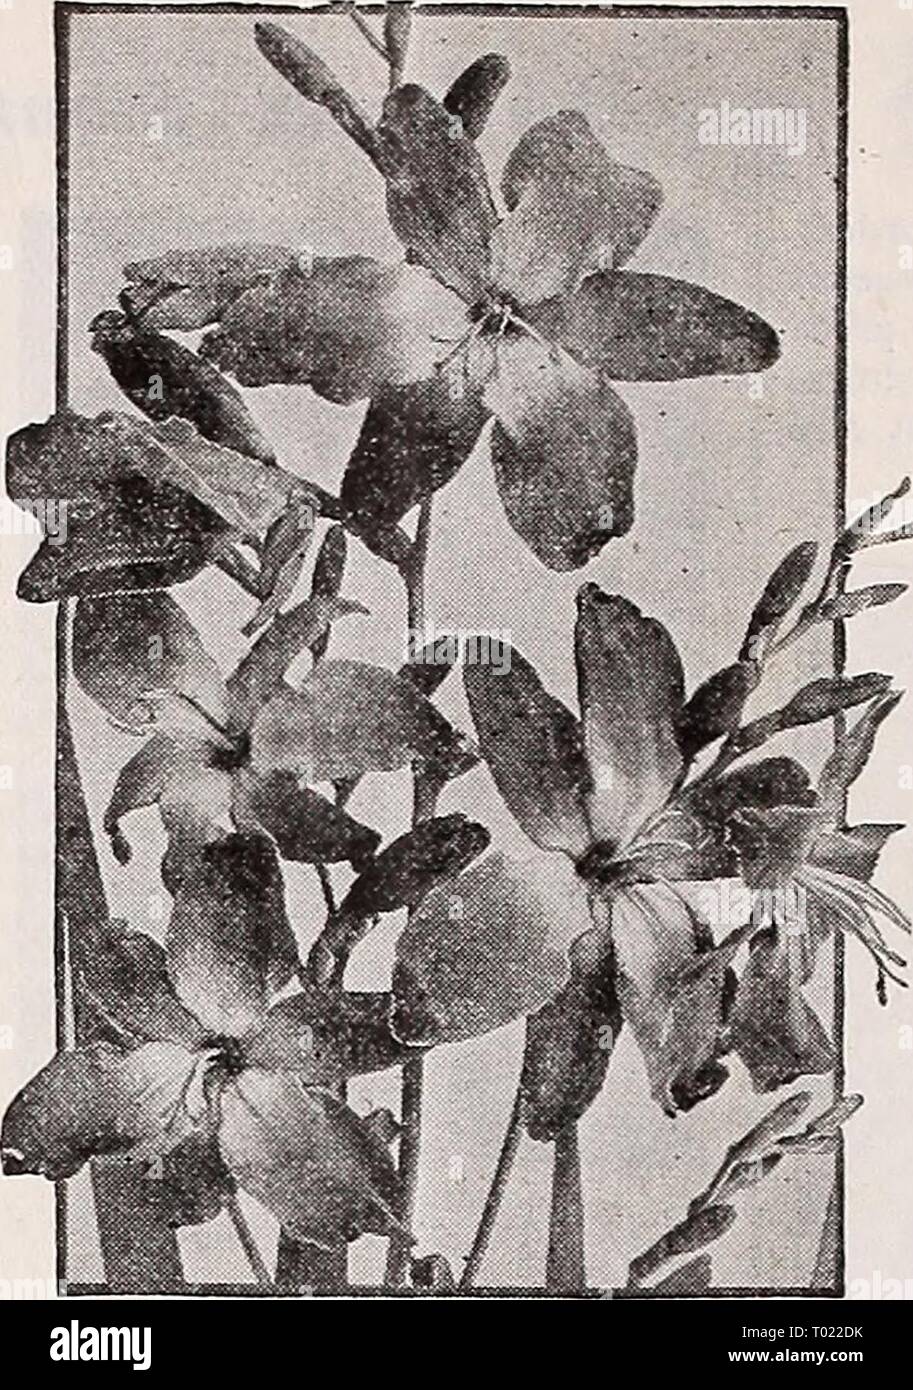 Dreer's hundredth anniversary 1938 specialties and novelties . dreershundredtha1938henr Year: 1938  SUMMER.FLOWERING BULBS Galtonia—Hyacimhus Cape Hyacinth ® A strong-growing, summer-flowering variety of Hyacinth quite distinct from those which bloom in the spring. Makes a strong stately flowerspike 3 to 5 feet high, which bears from 20 to 30 pure white, bell- shaped blooms during the summer and early fall. It is hardy around Philadelphia. 25c each; $2.50 per doz. Gloriosa § Superba Rothschildiana Climbing Lily A splendid tropical climber, easy to grow in a warm greenhouse and does well in she Stock Photo